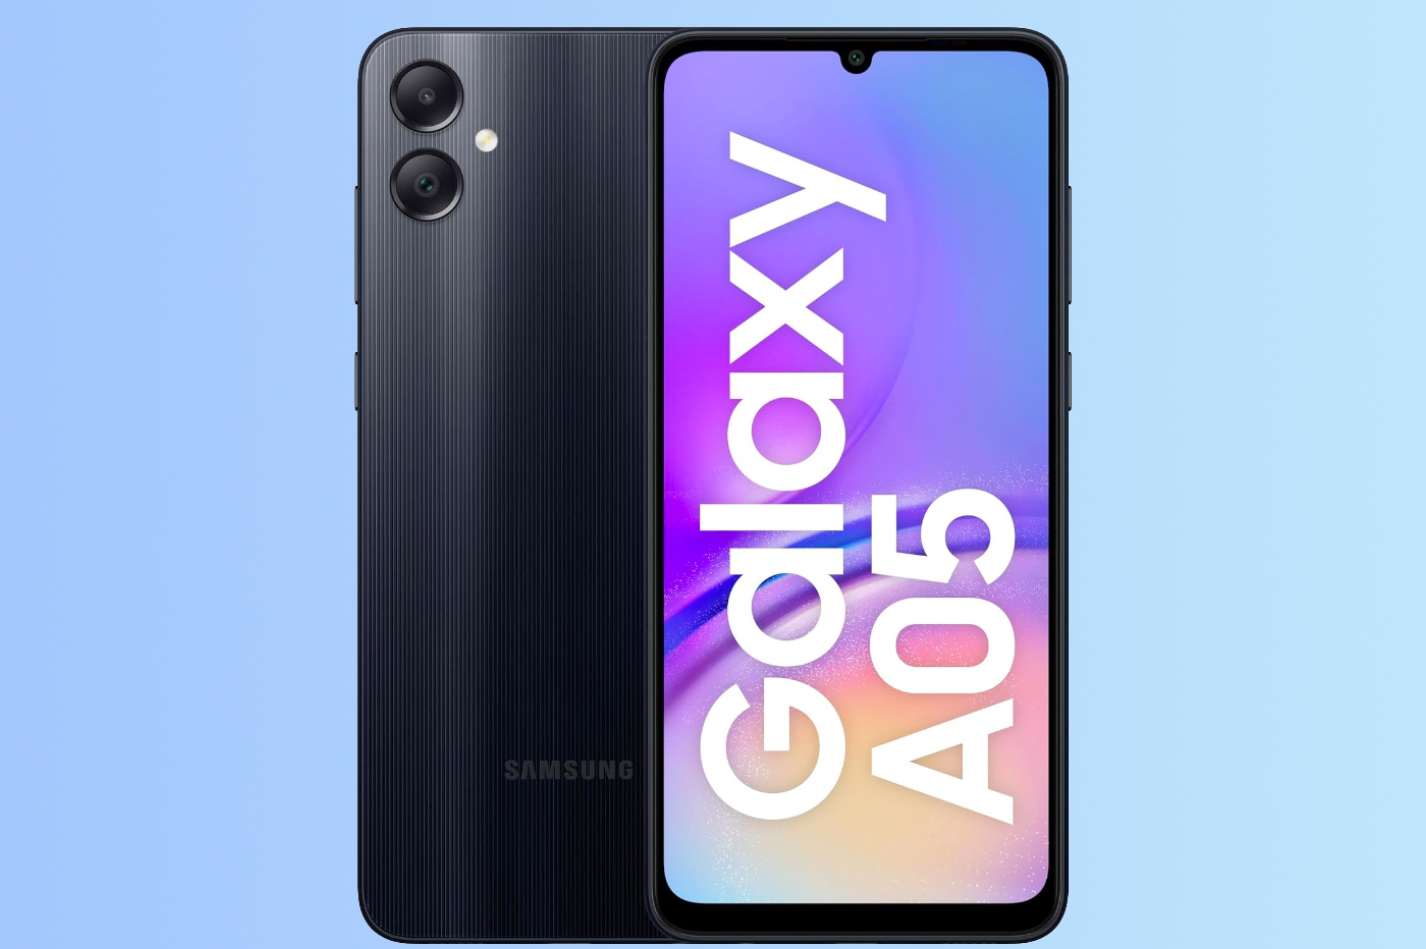 Samsung Galaxy A05 under rs 10000 with 50 megapixel camera